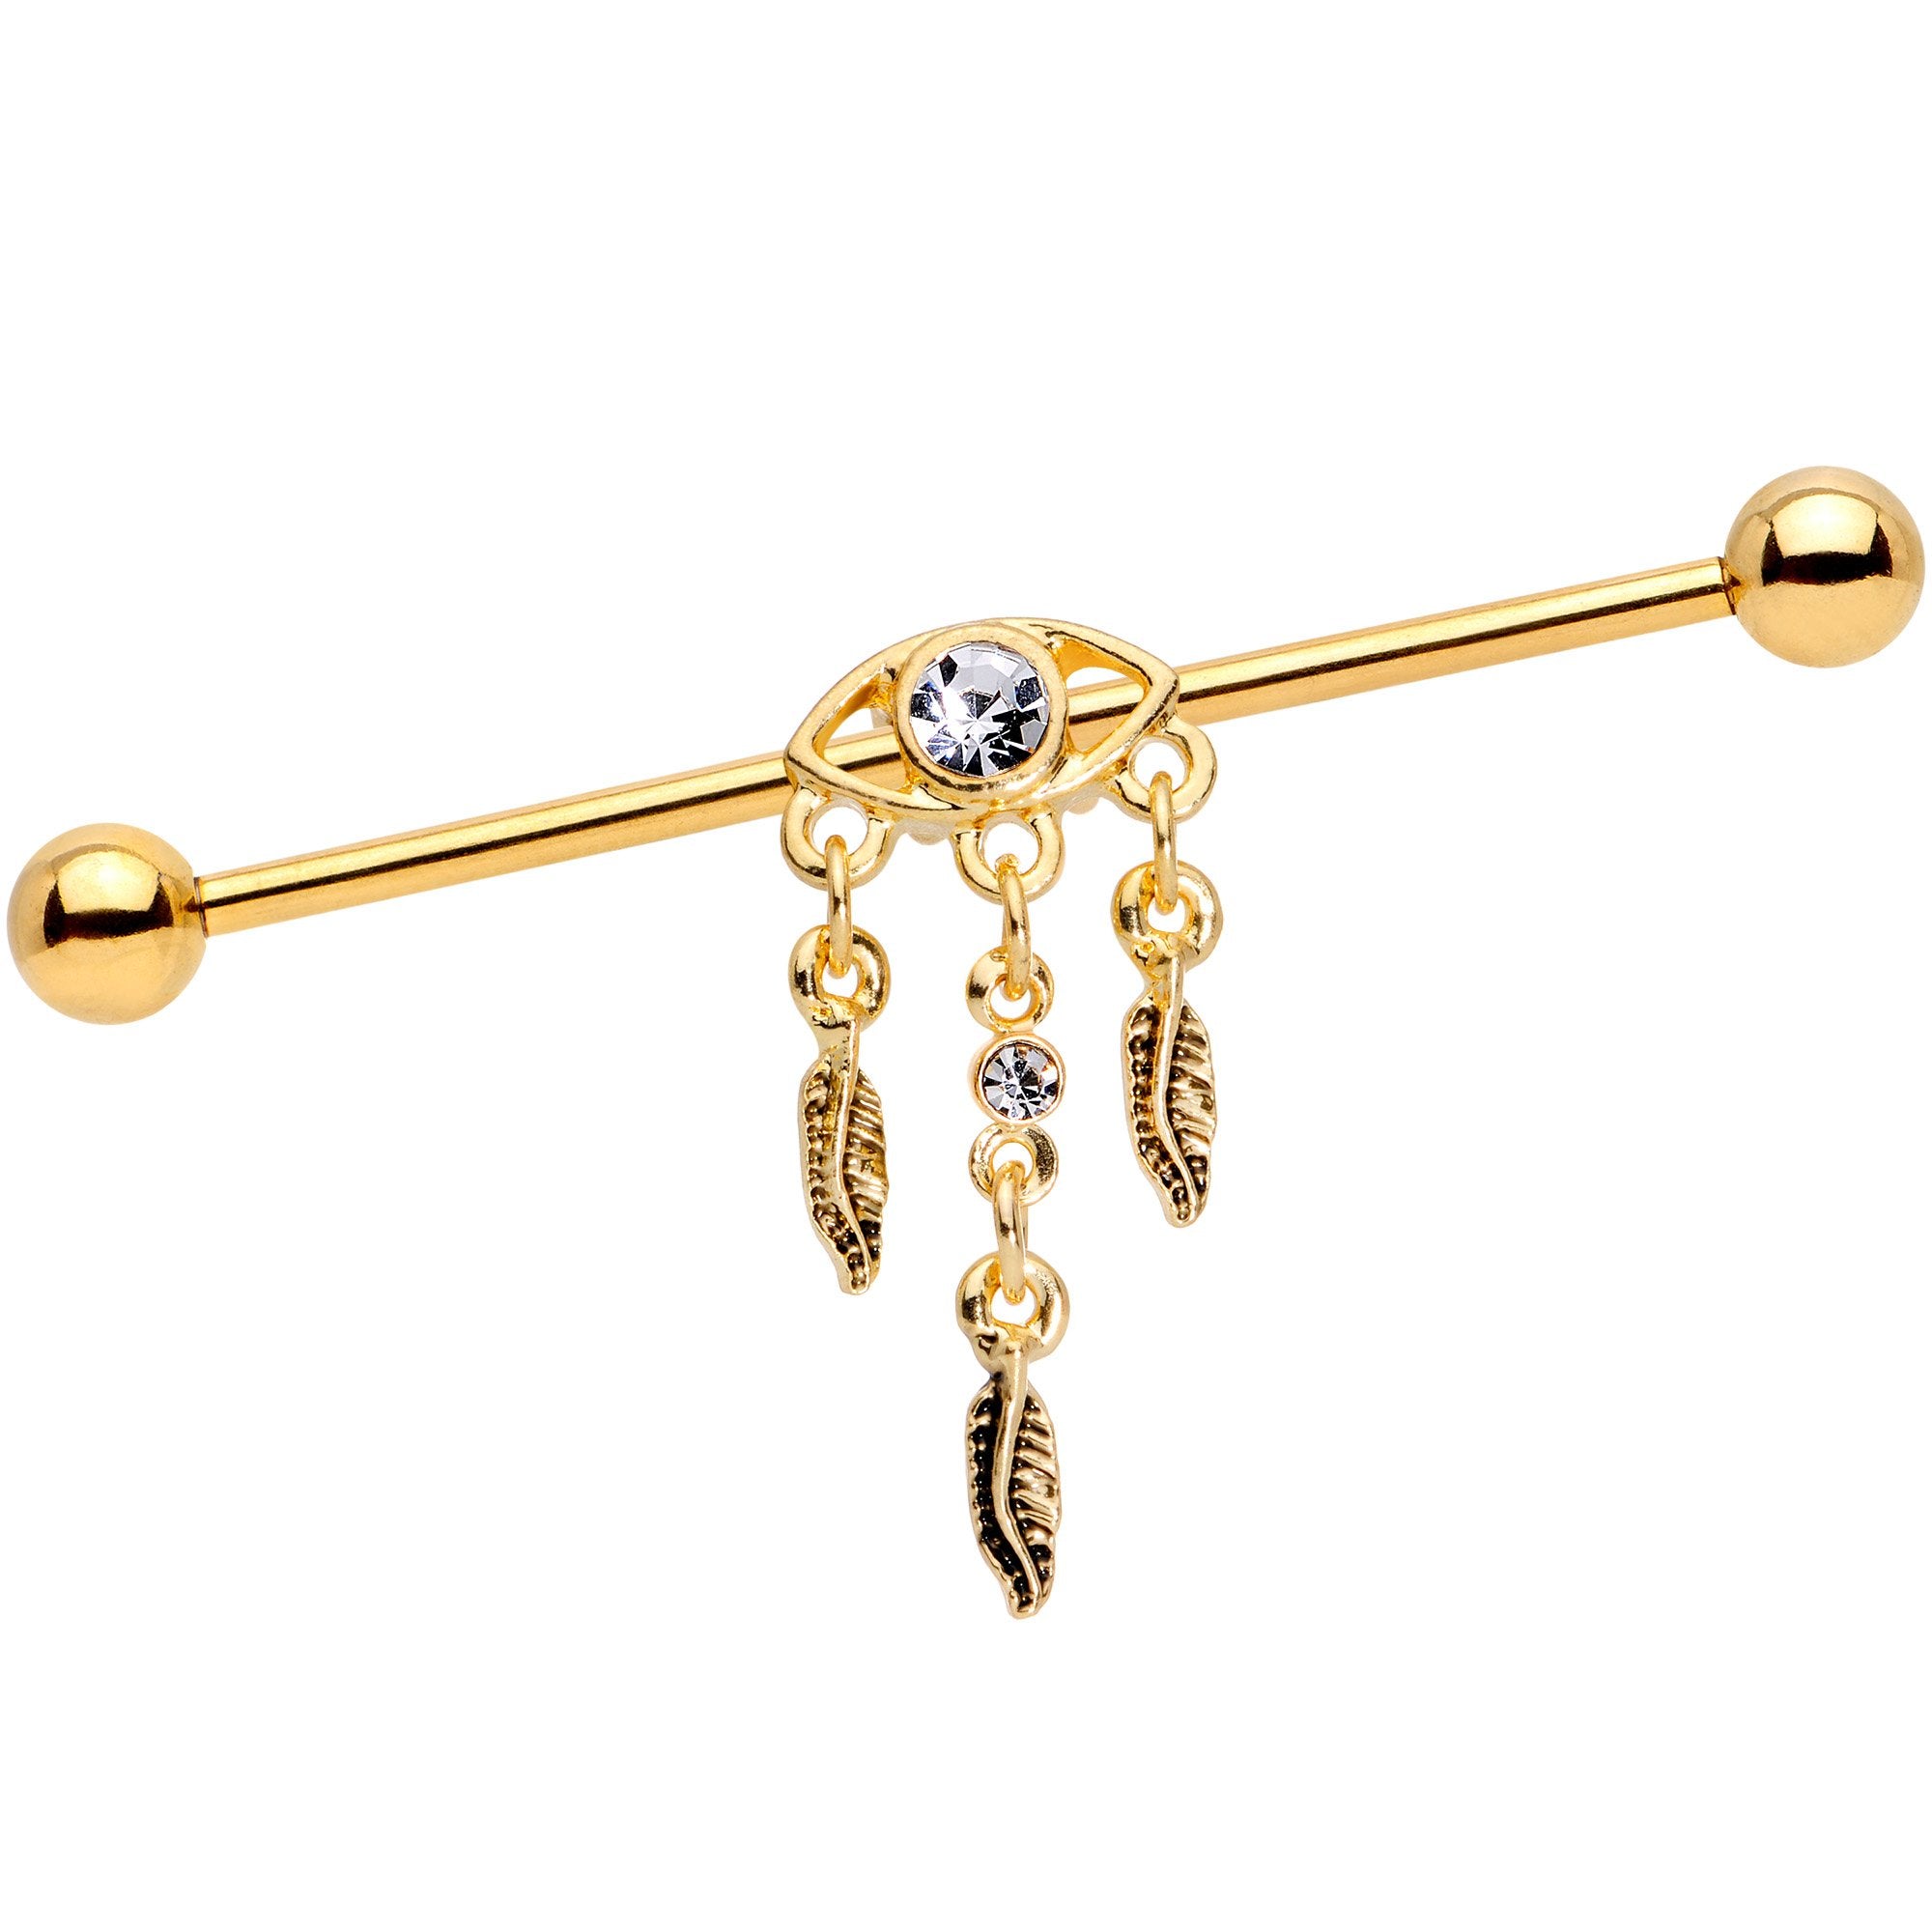 Clear Gem Gold Tone Eye Feather Dangle Industrial Barbell 38mm